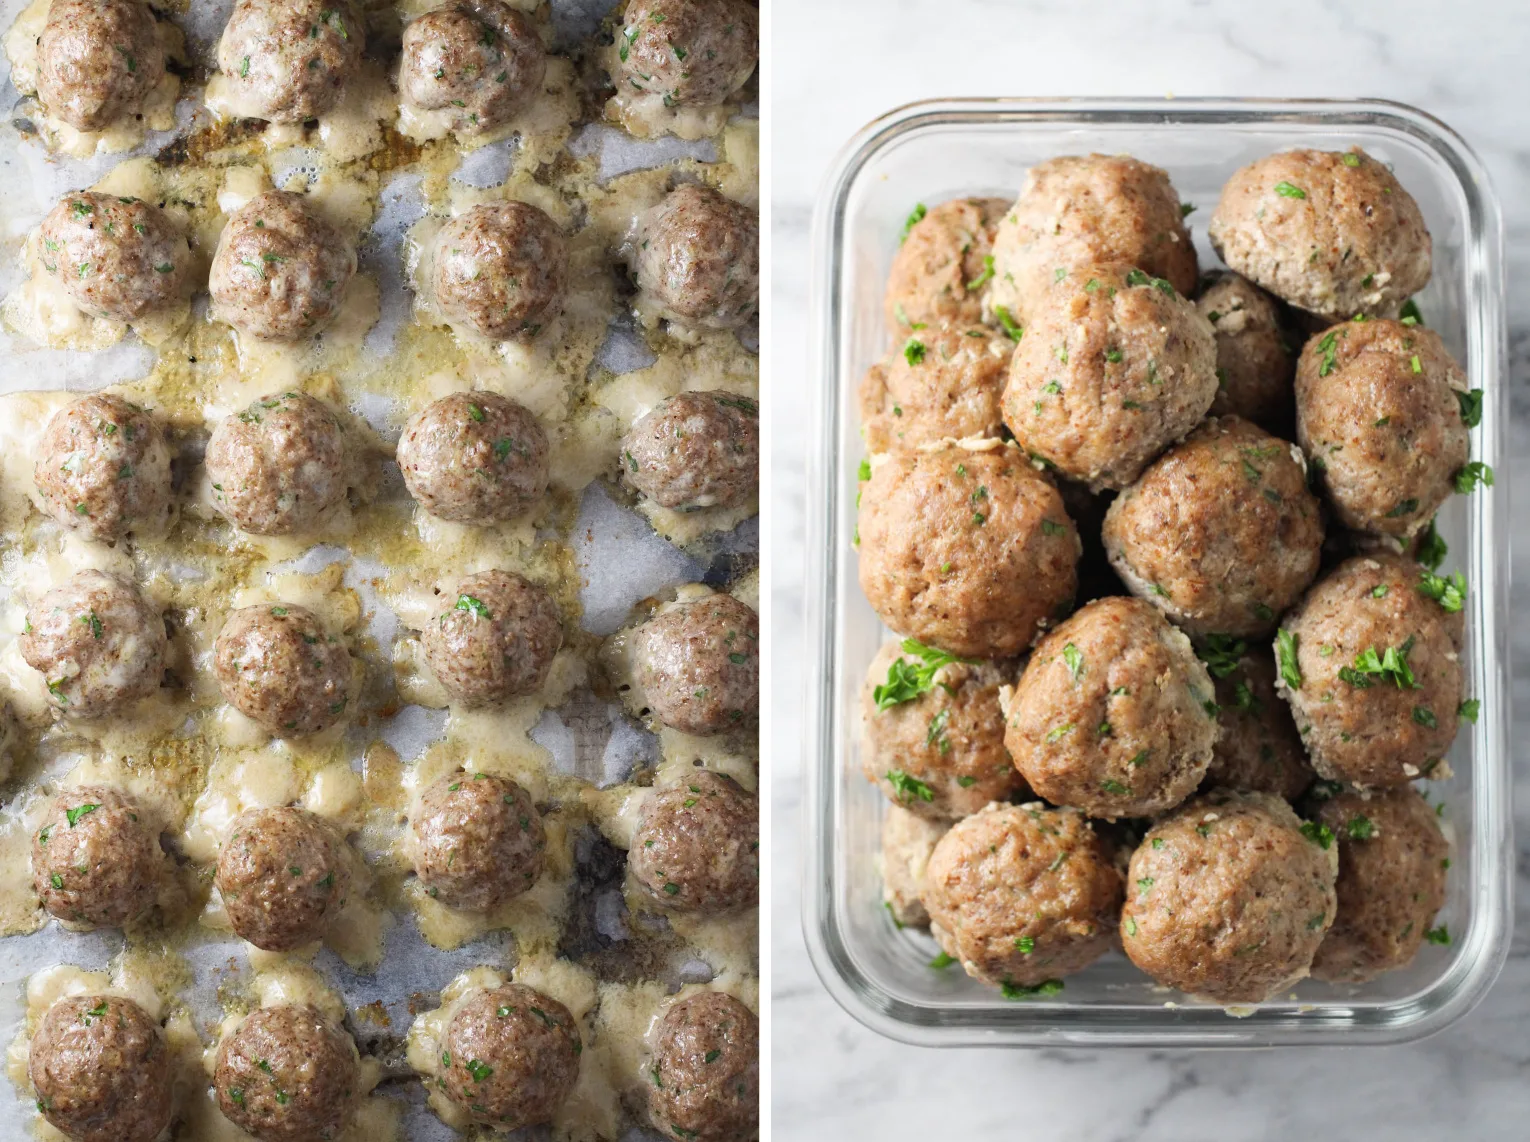 Two images side by side. The image on the left: baked meatballs on a baking sheet. The image on the right: baked meatballs in a glass container.